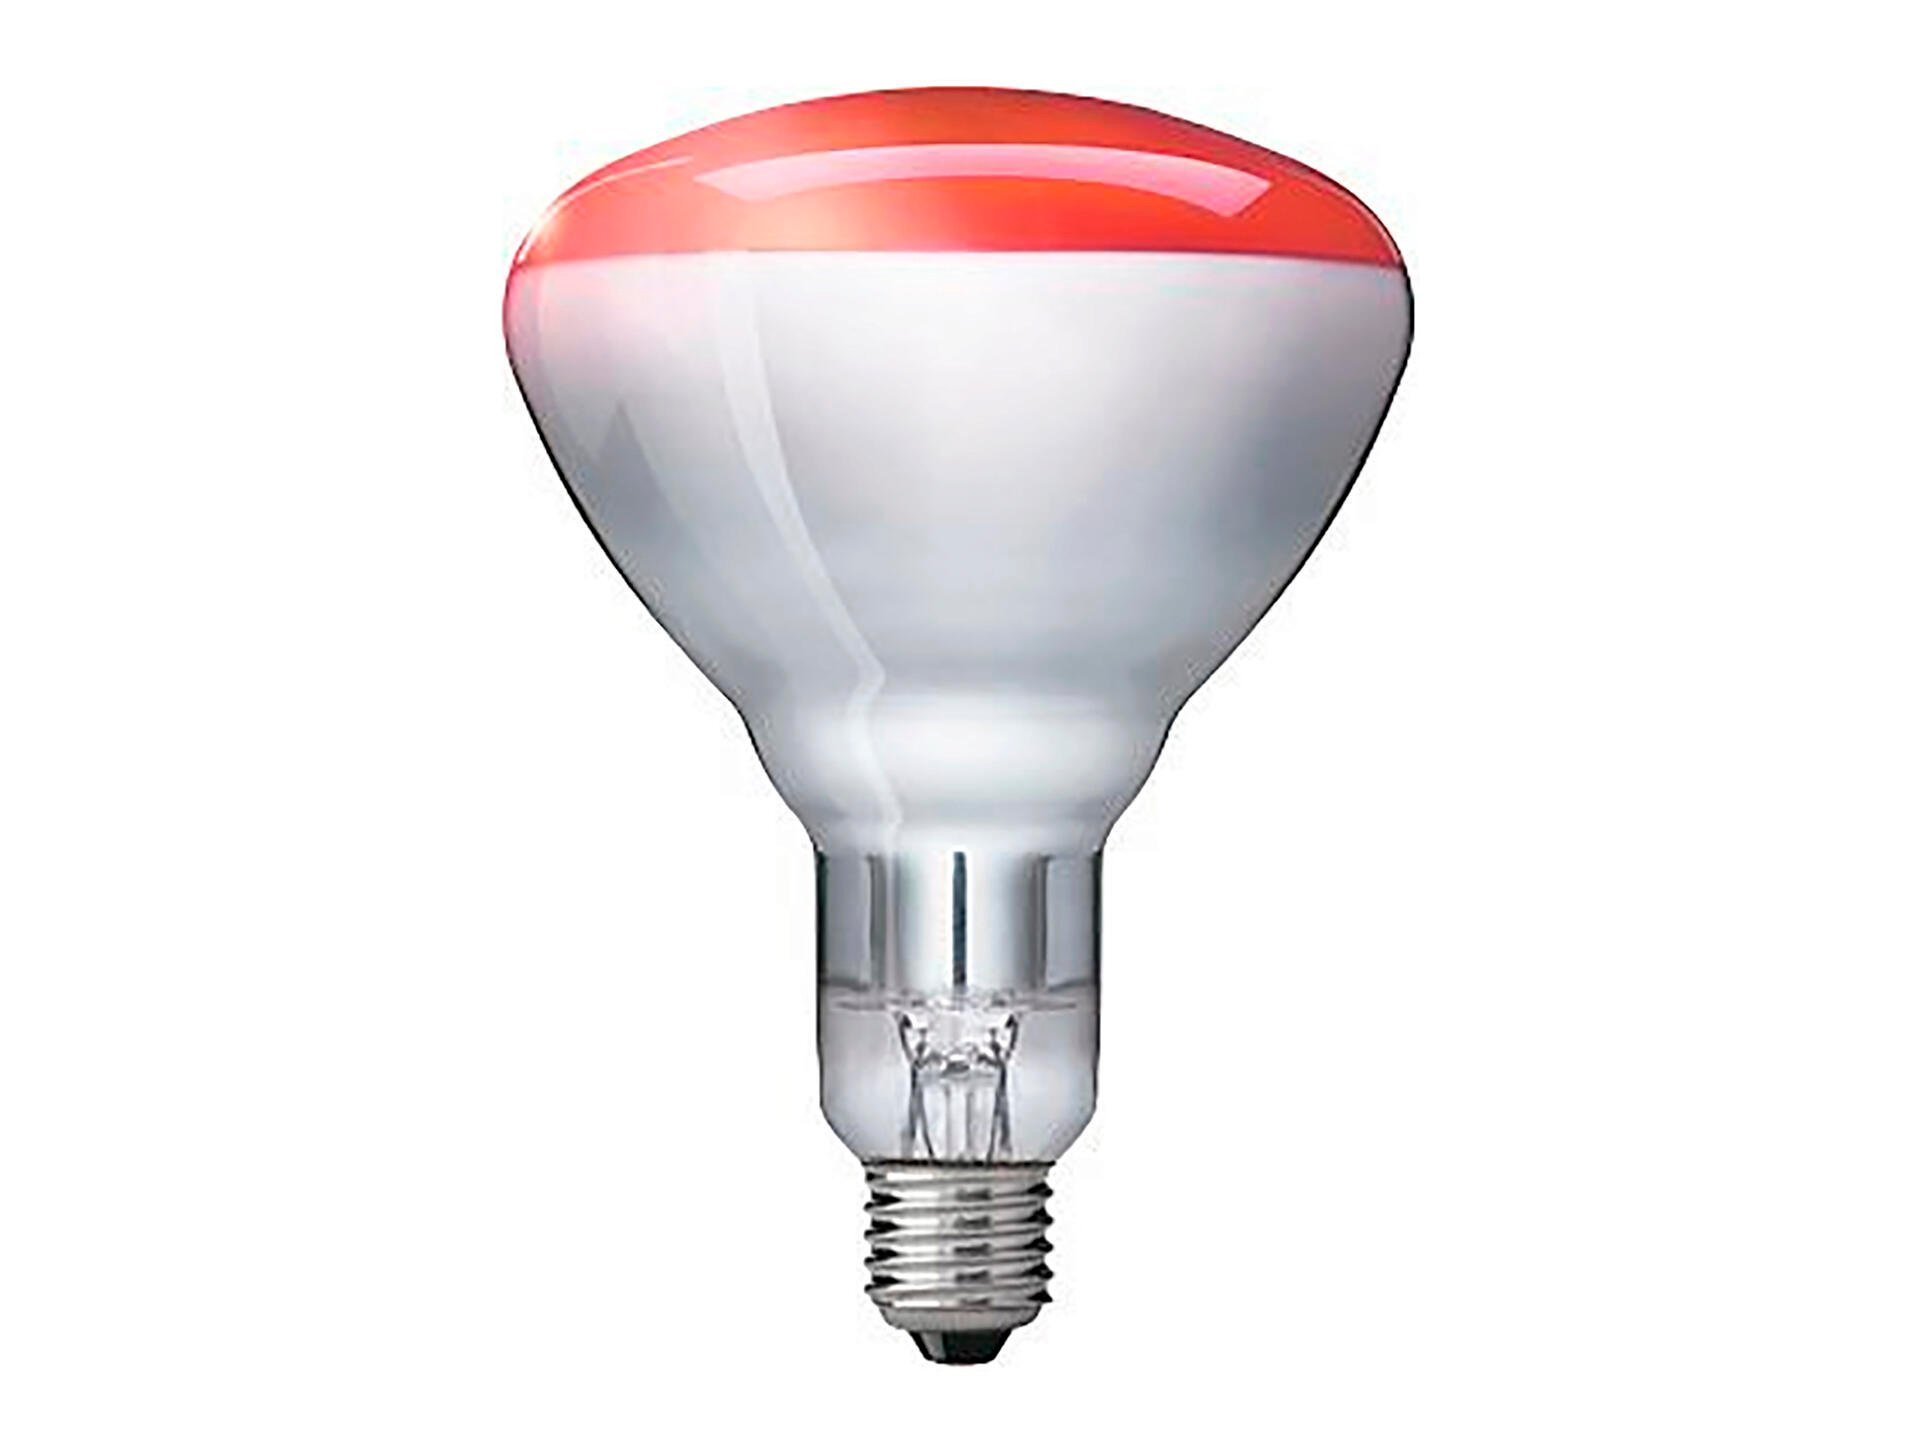 Philips IR ampoule infrarouge E27 150W dimmable